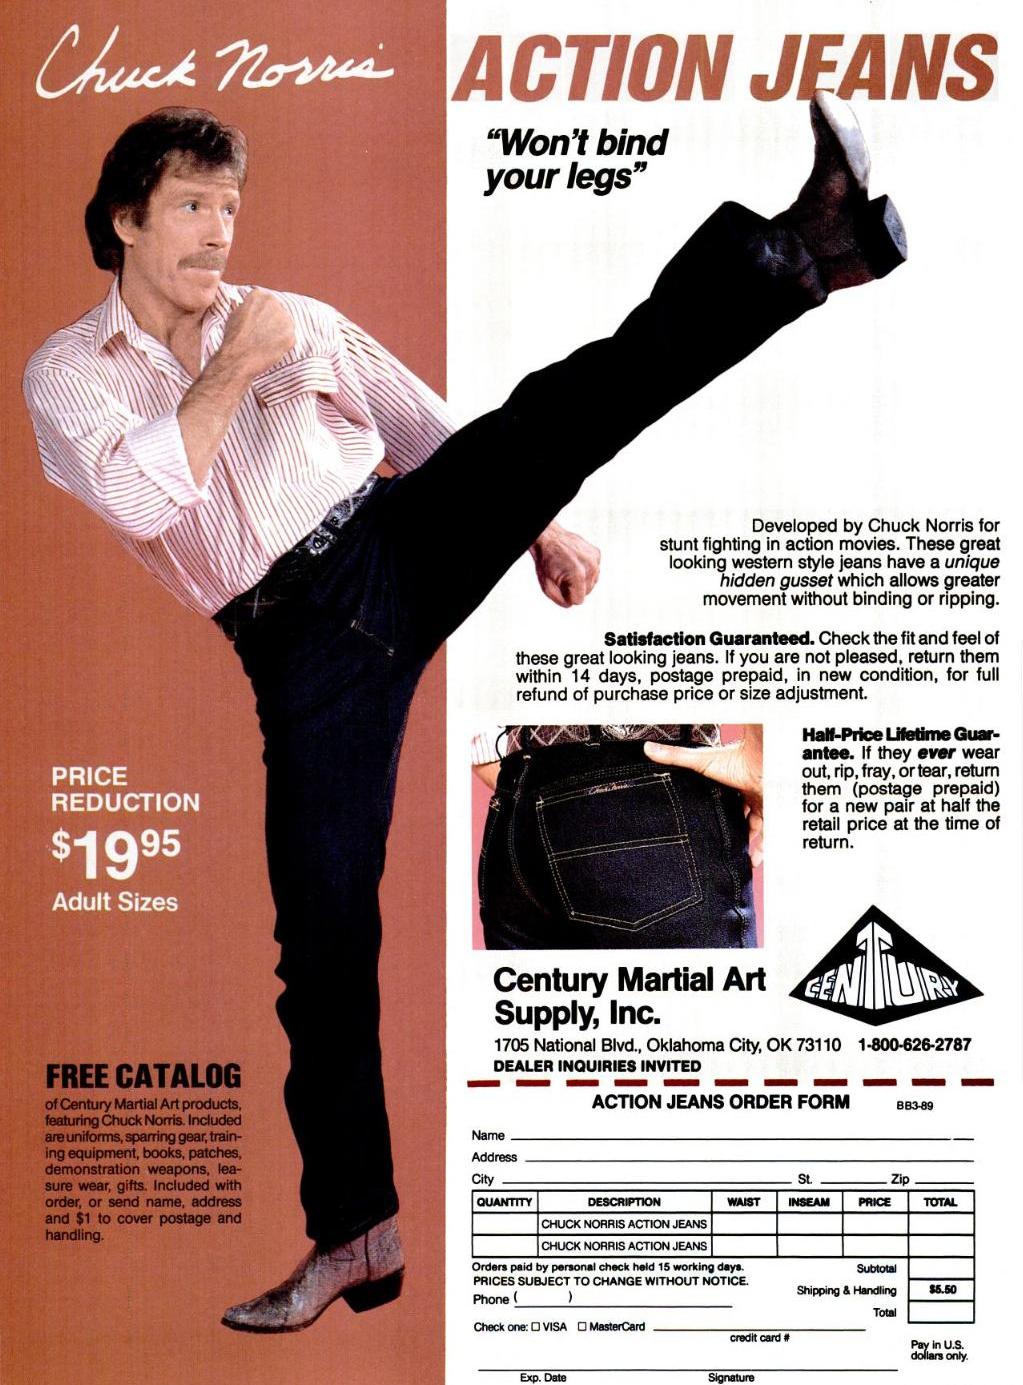 An ad for Action Jeans featuring a man kicking a pair of jeans that embodies the spirit of Chuck Norris.